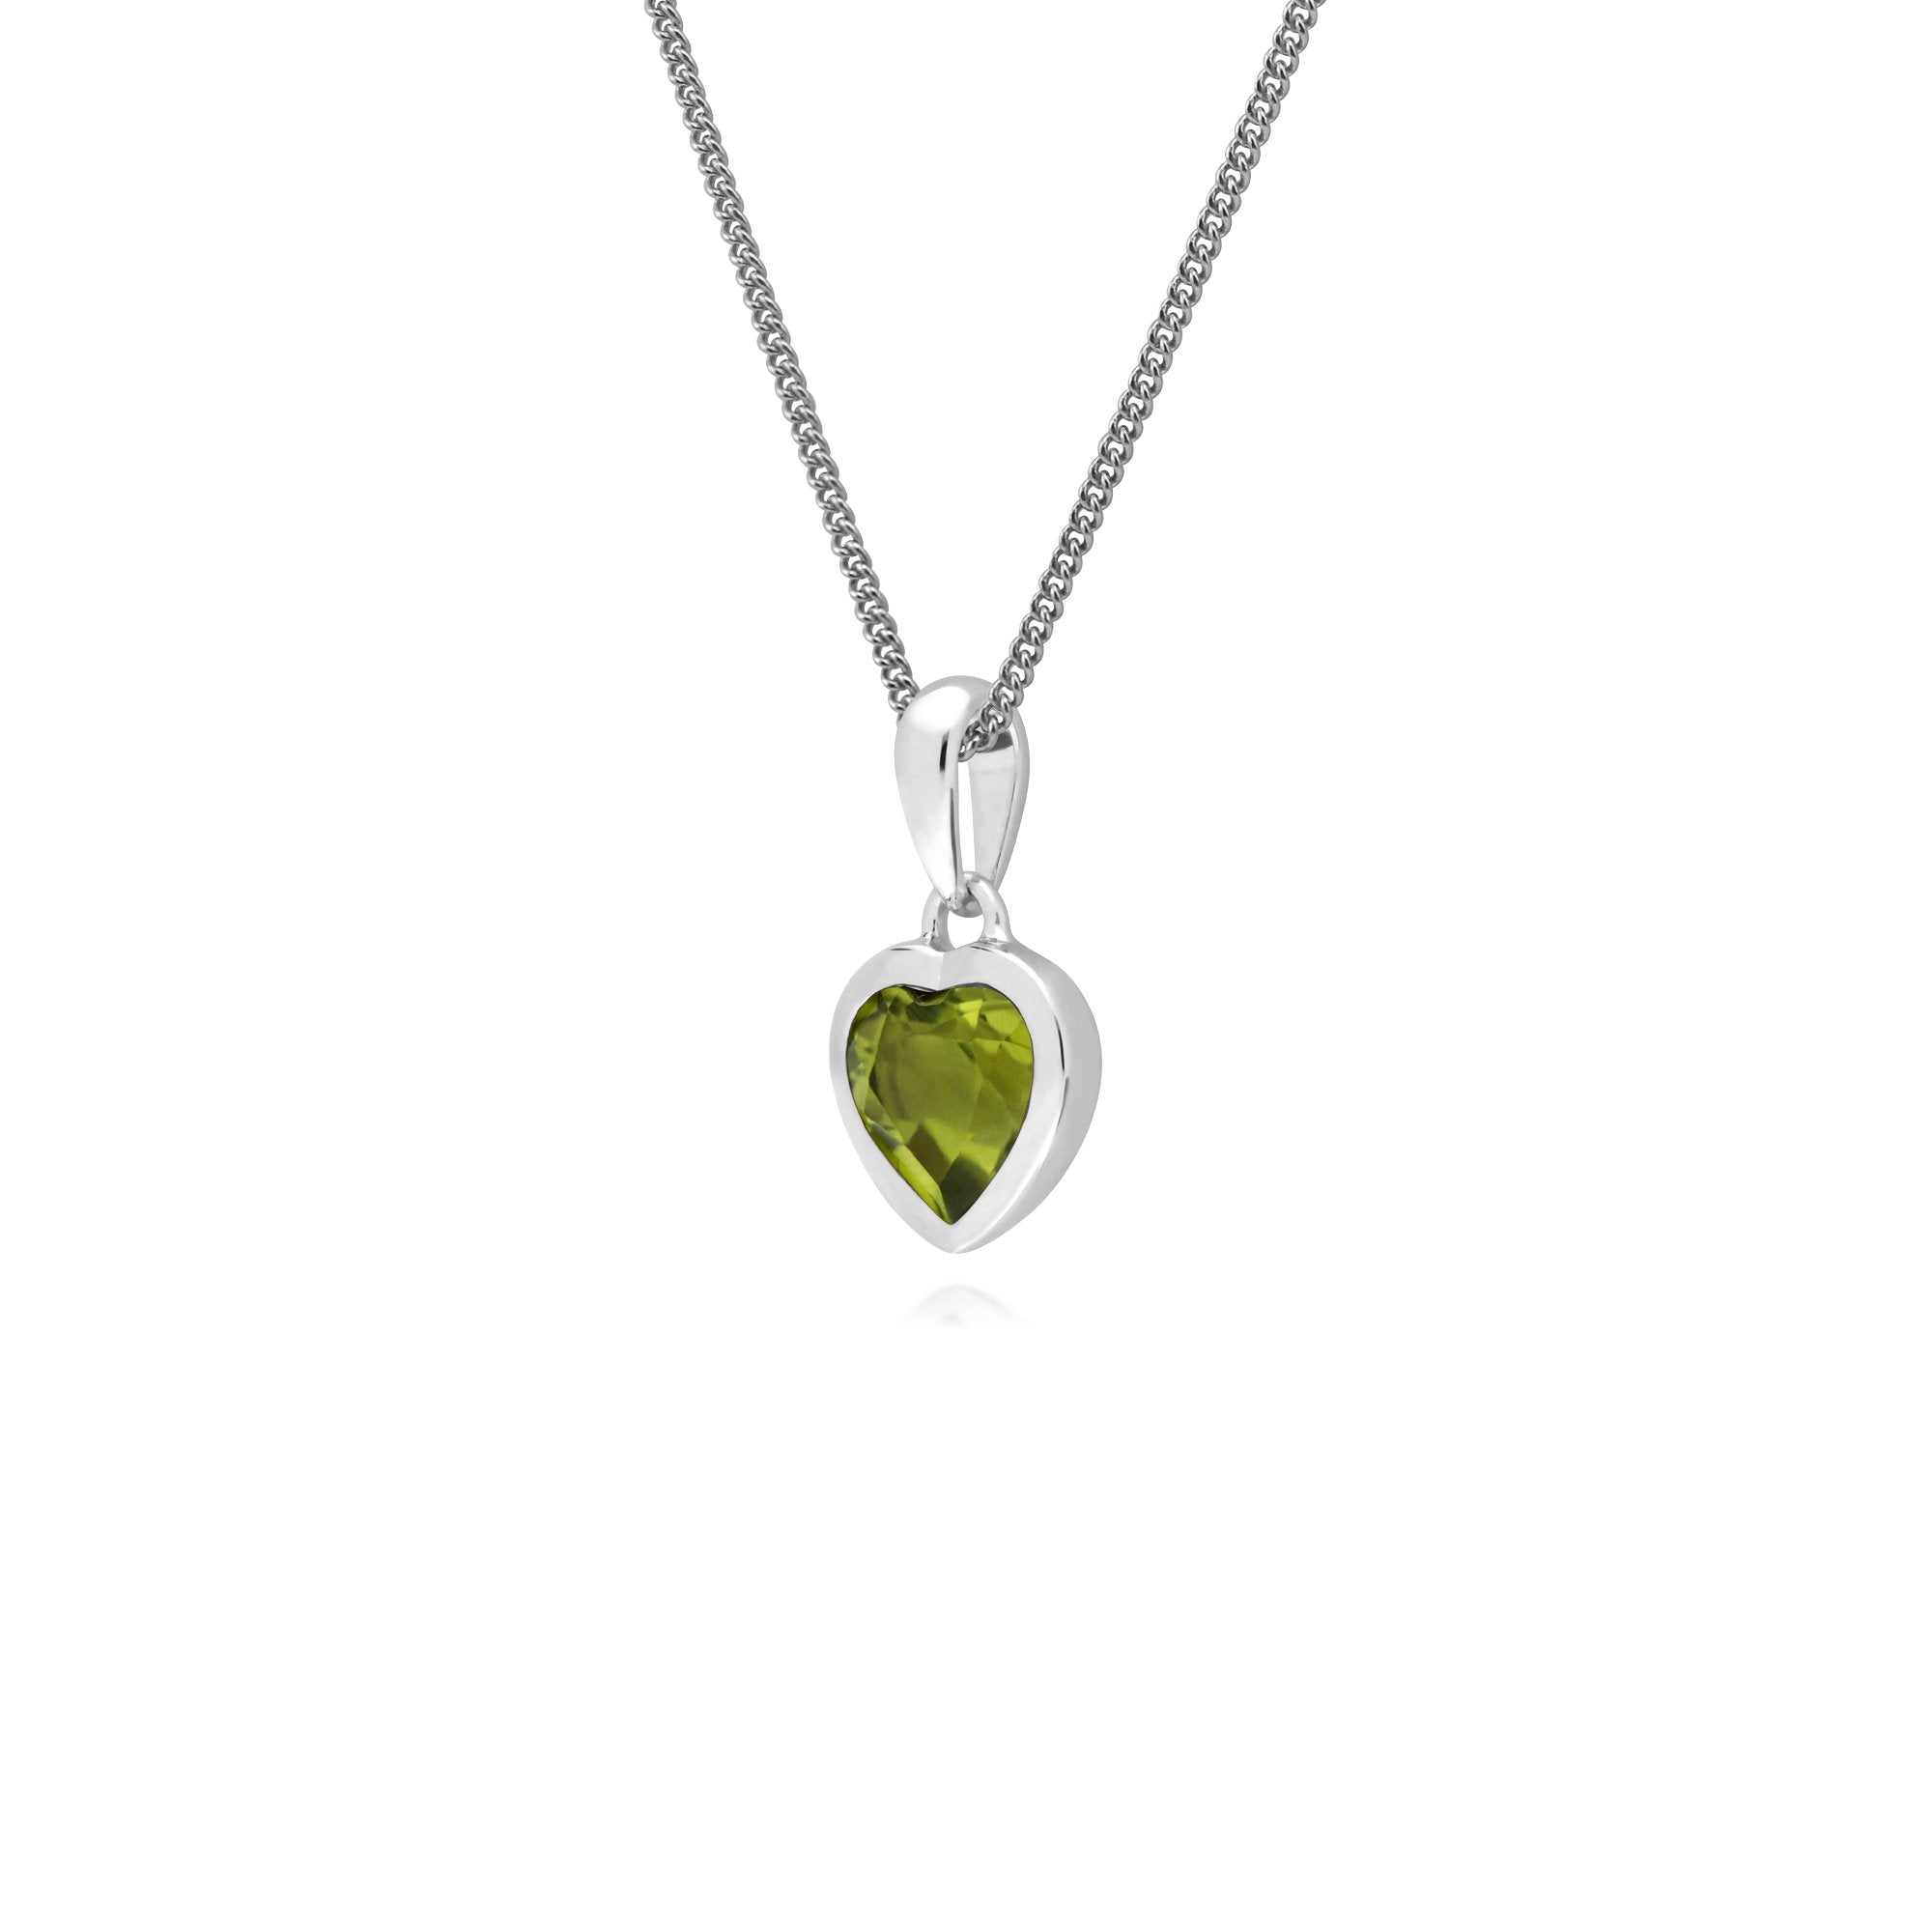 Essential Heart Shaped Peridot Pendant in 925 Sterling Silver